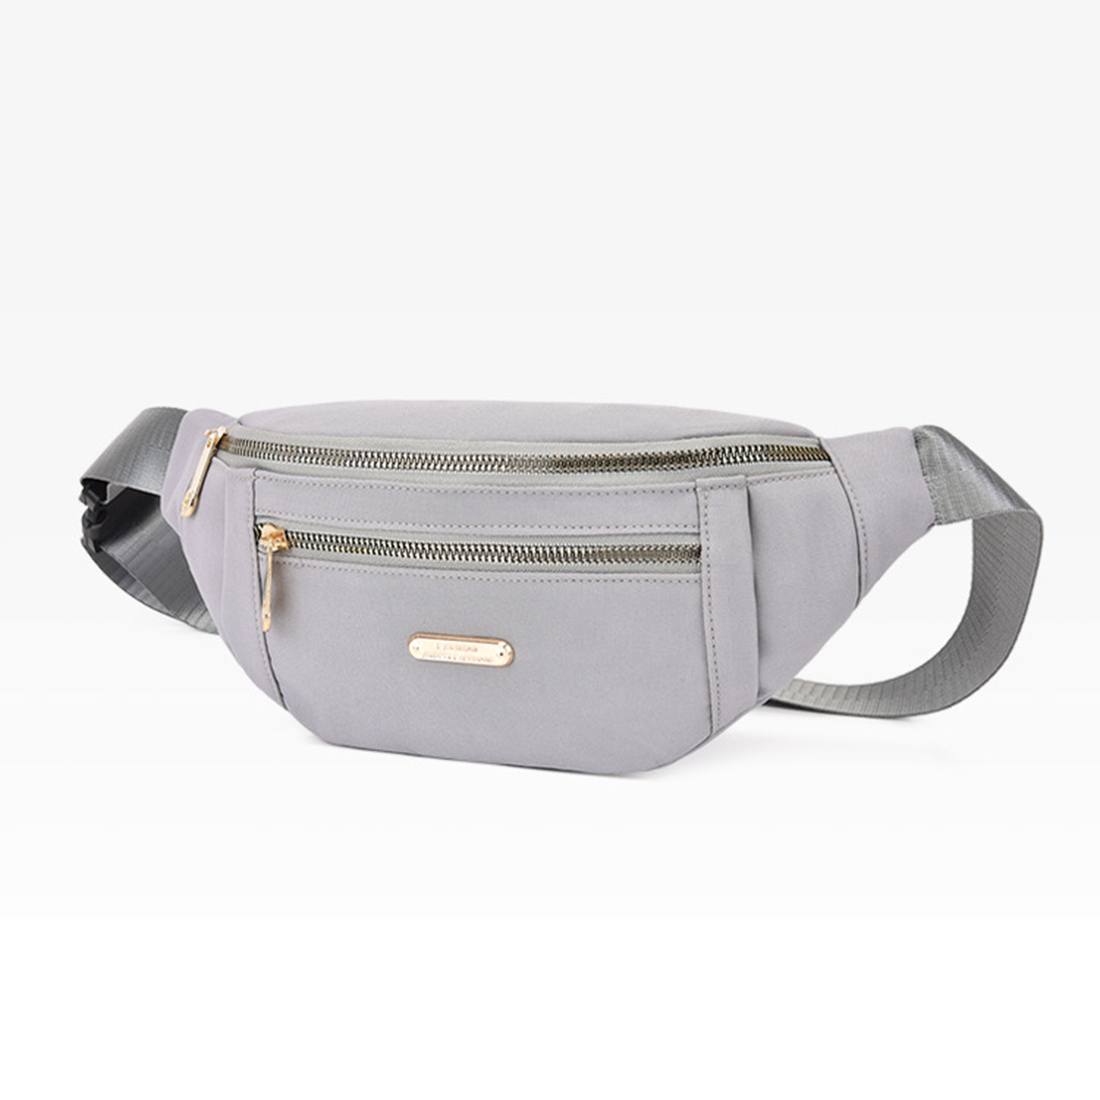 SEARCHI Fanny Pack for Men & Women,Fashion Waist Bag Sports Multi-function Large Mobile Phone Bag Money Belt Bag Casual Bag Bum Bags for Travel Sports Running - image 3 of 3